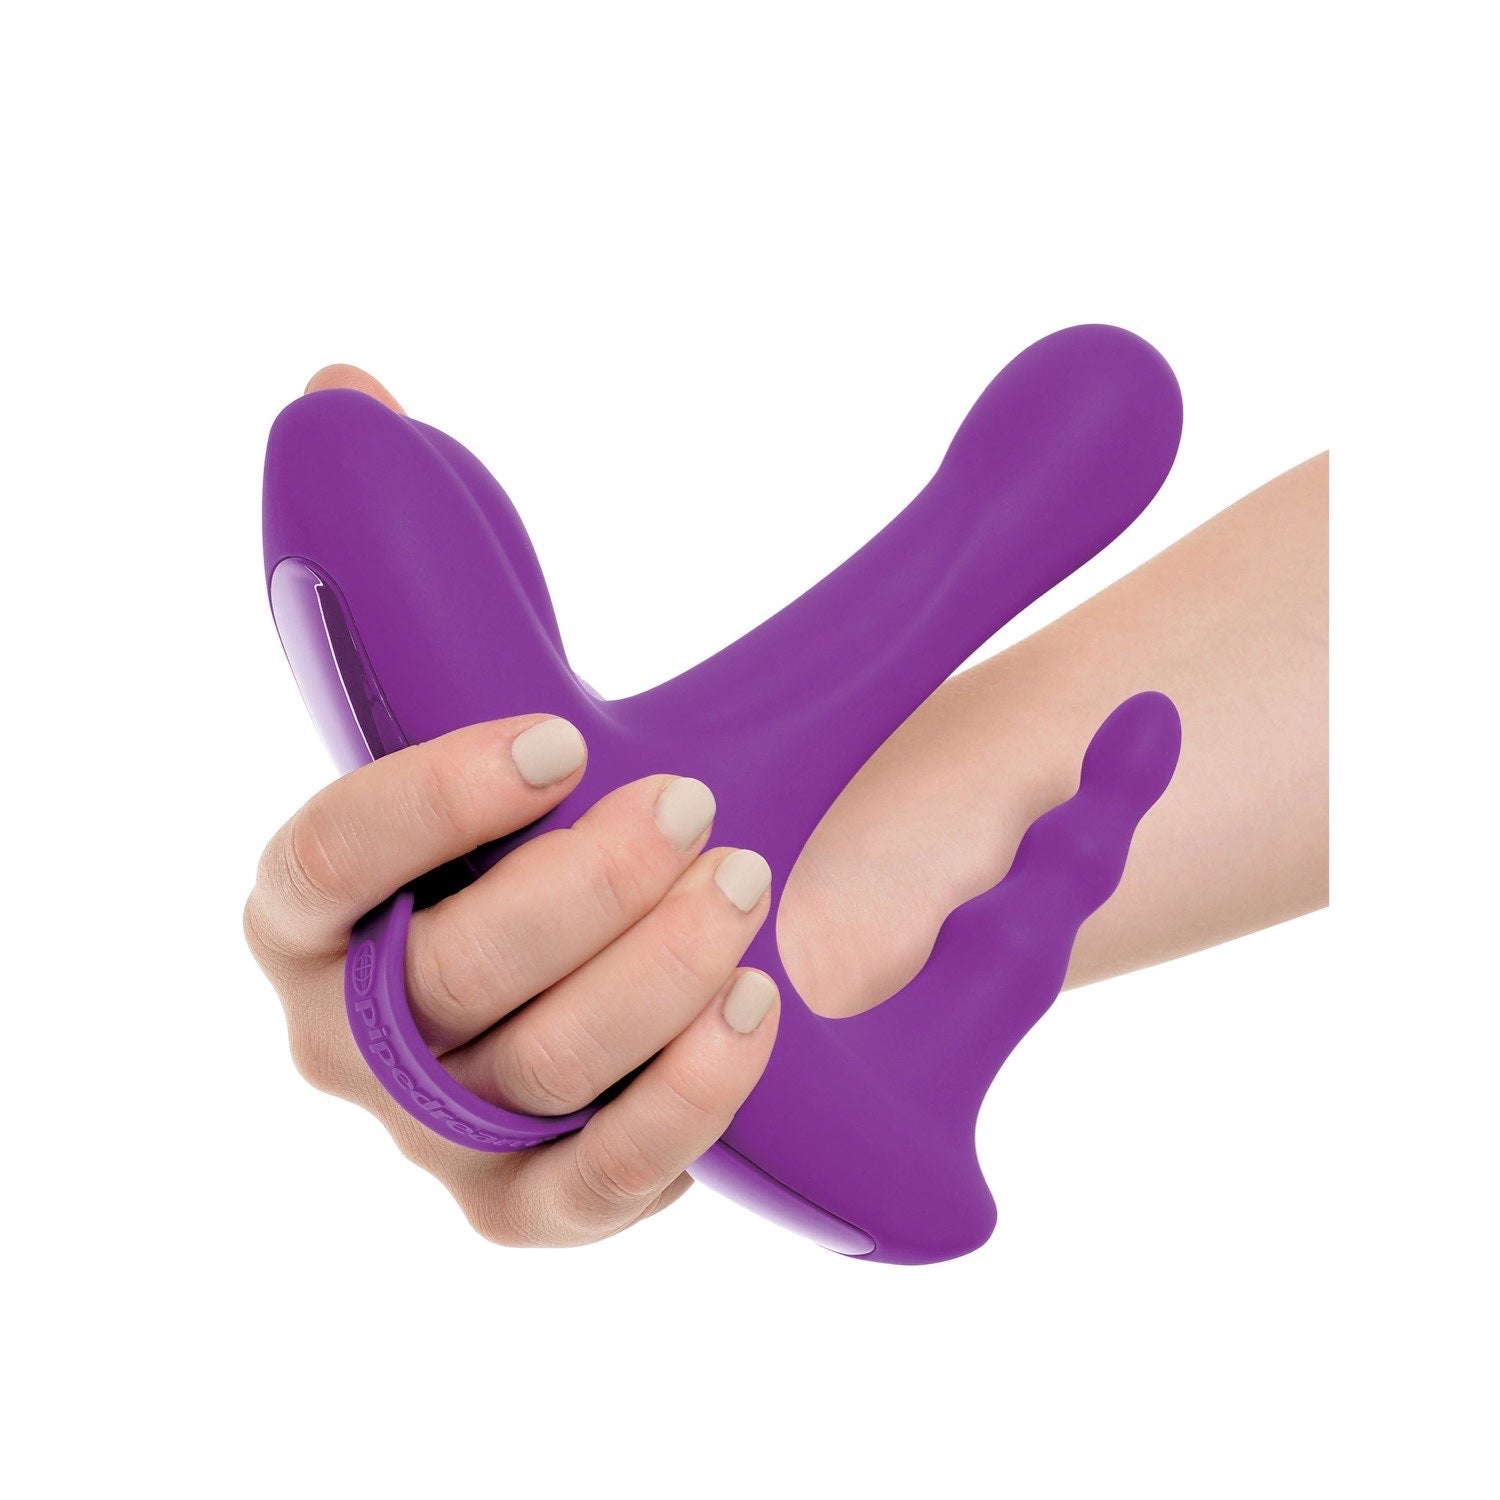 3Some Rock N Ride - Purple USB Rechargeable Stimulator with Wireless Remote by Pipedream